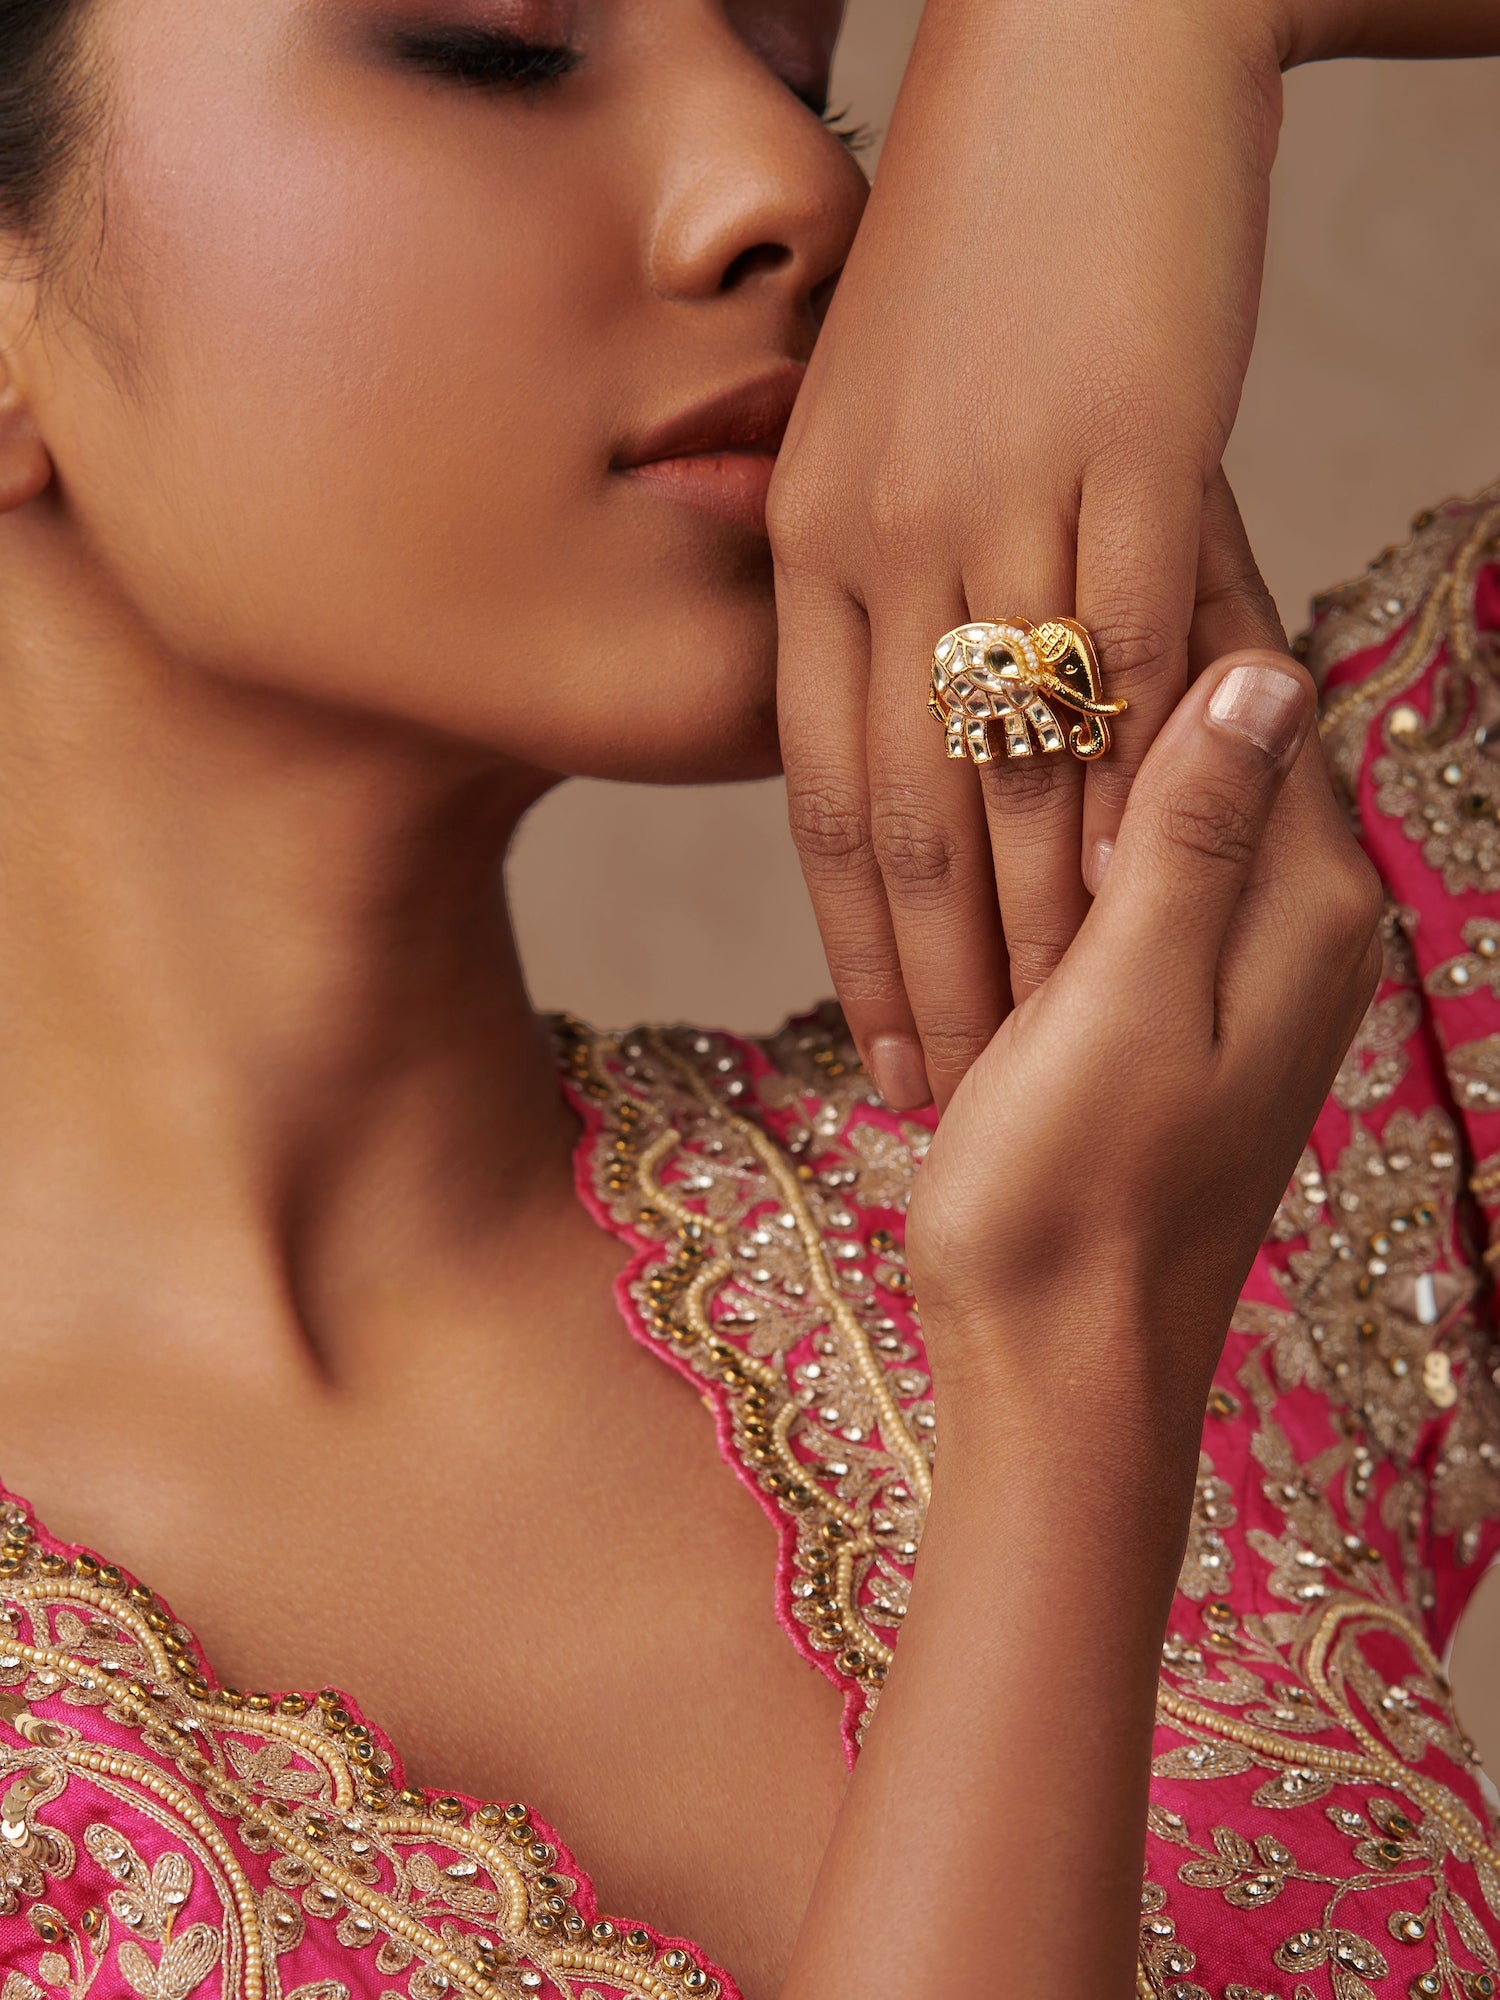 Customised Gold Rings with Diamonds